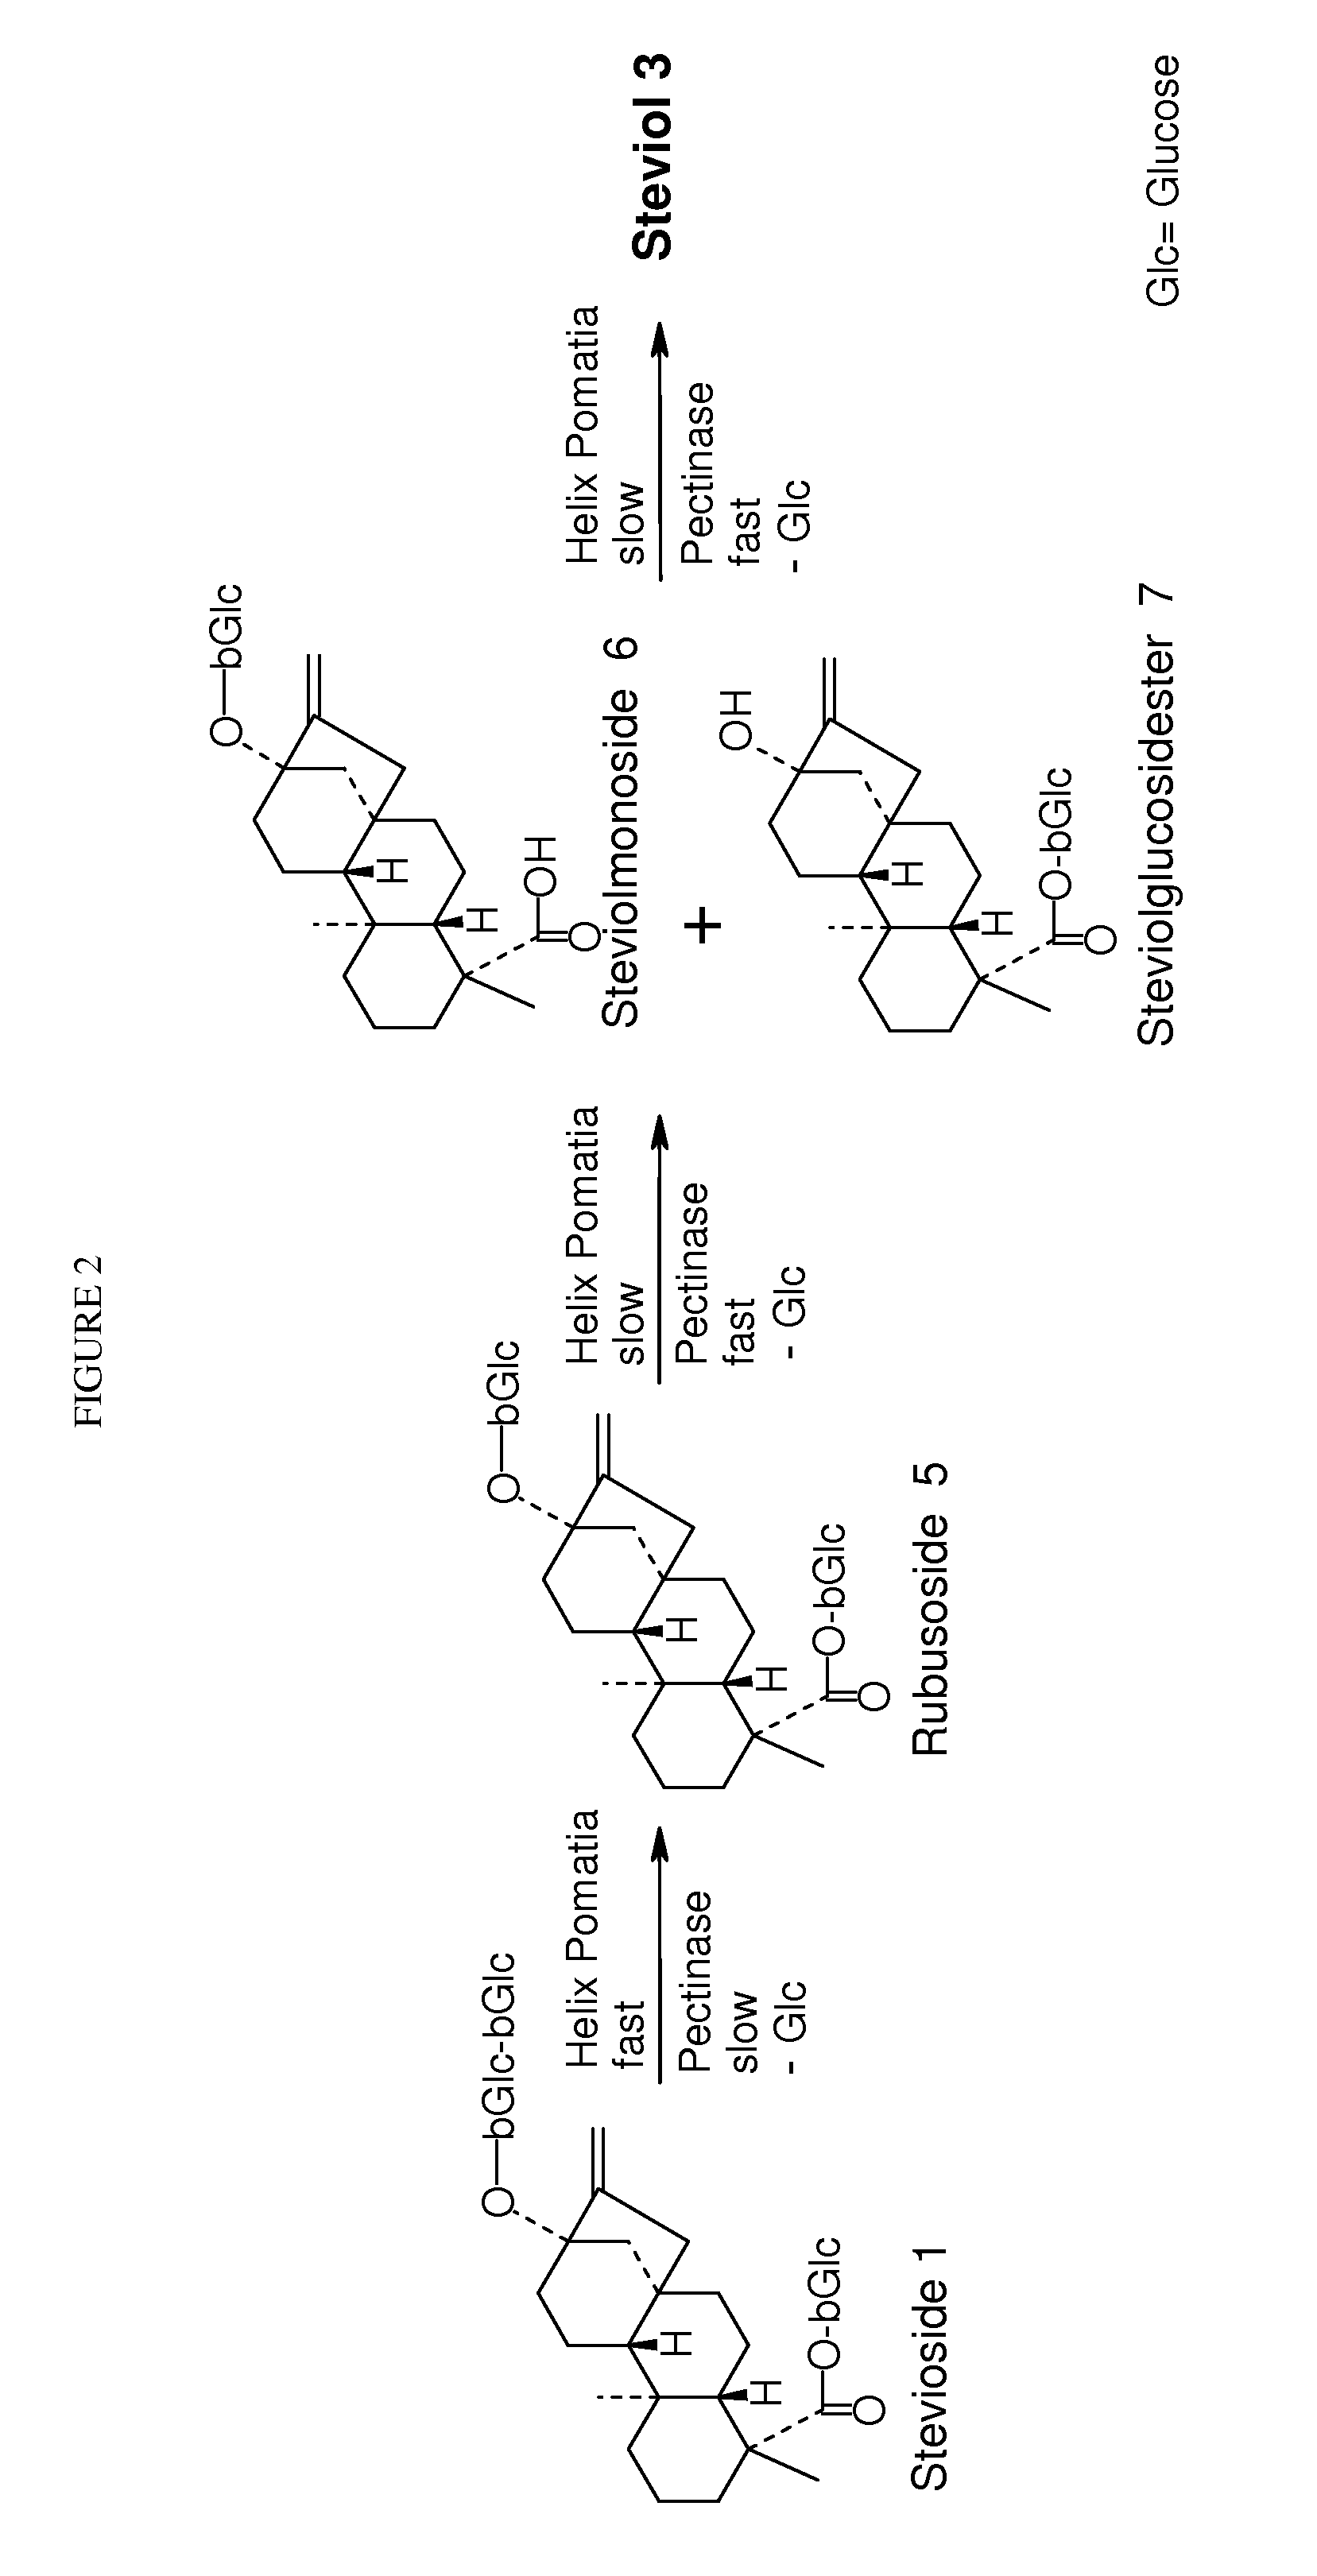 Enzymatic cleavage of stevioside to produce steviol